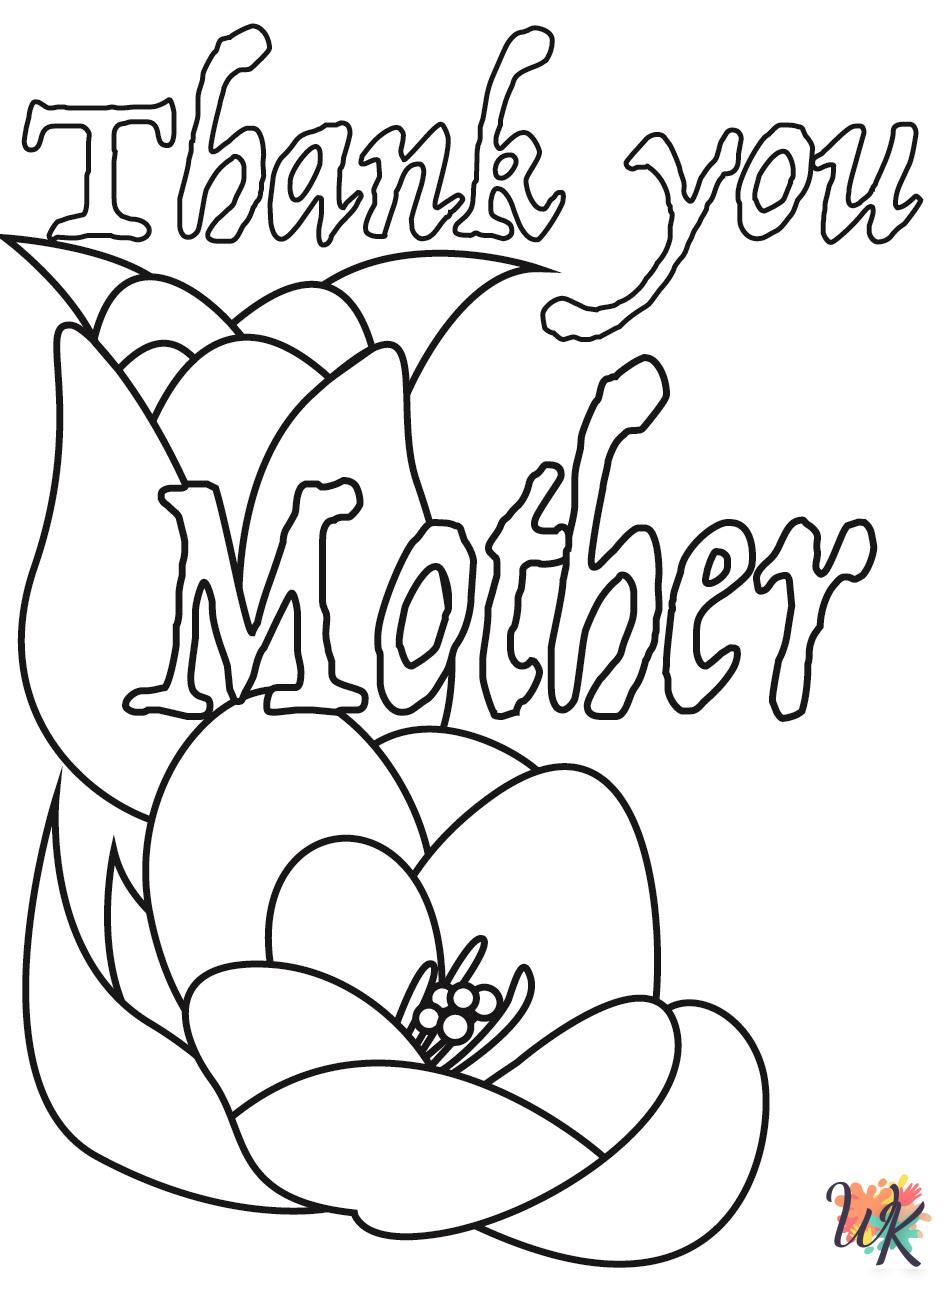 Mother's day coloring pages free